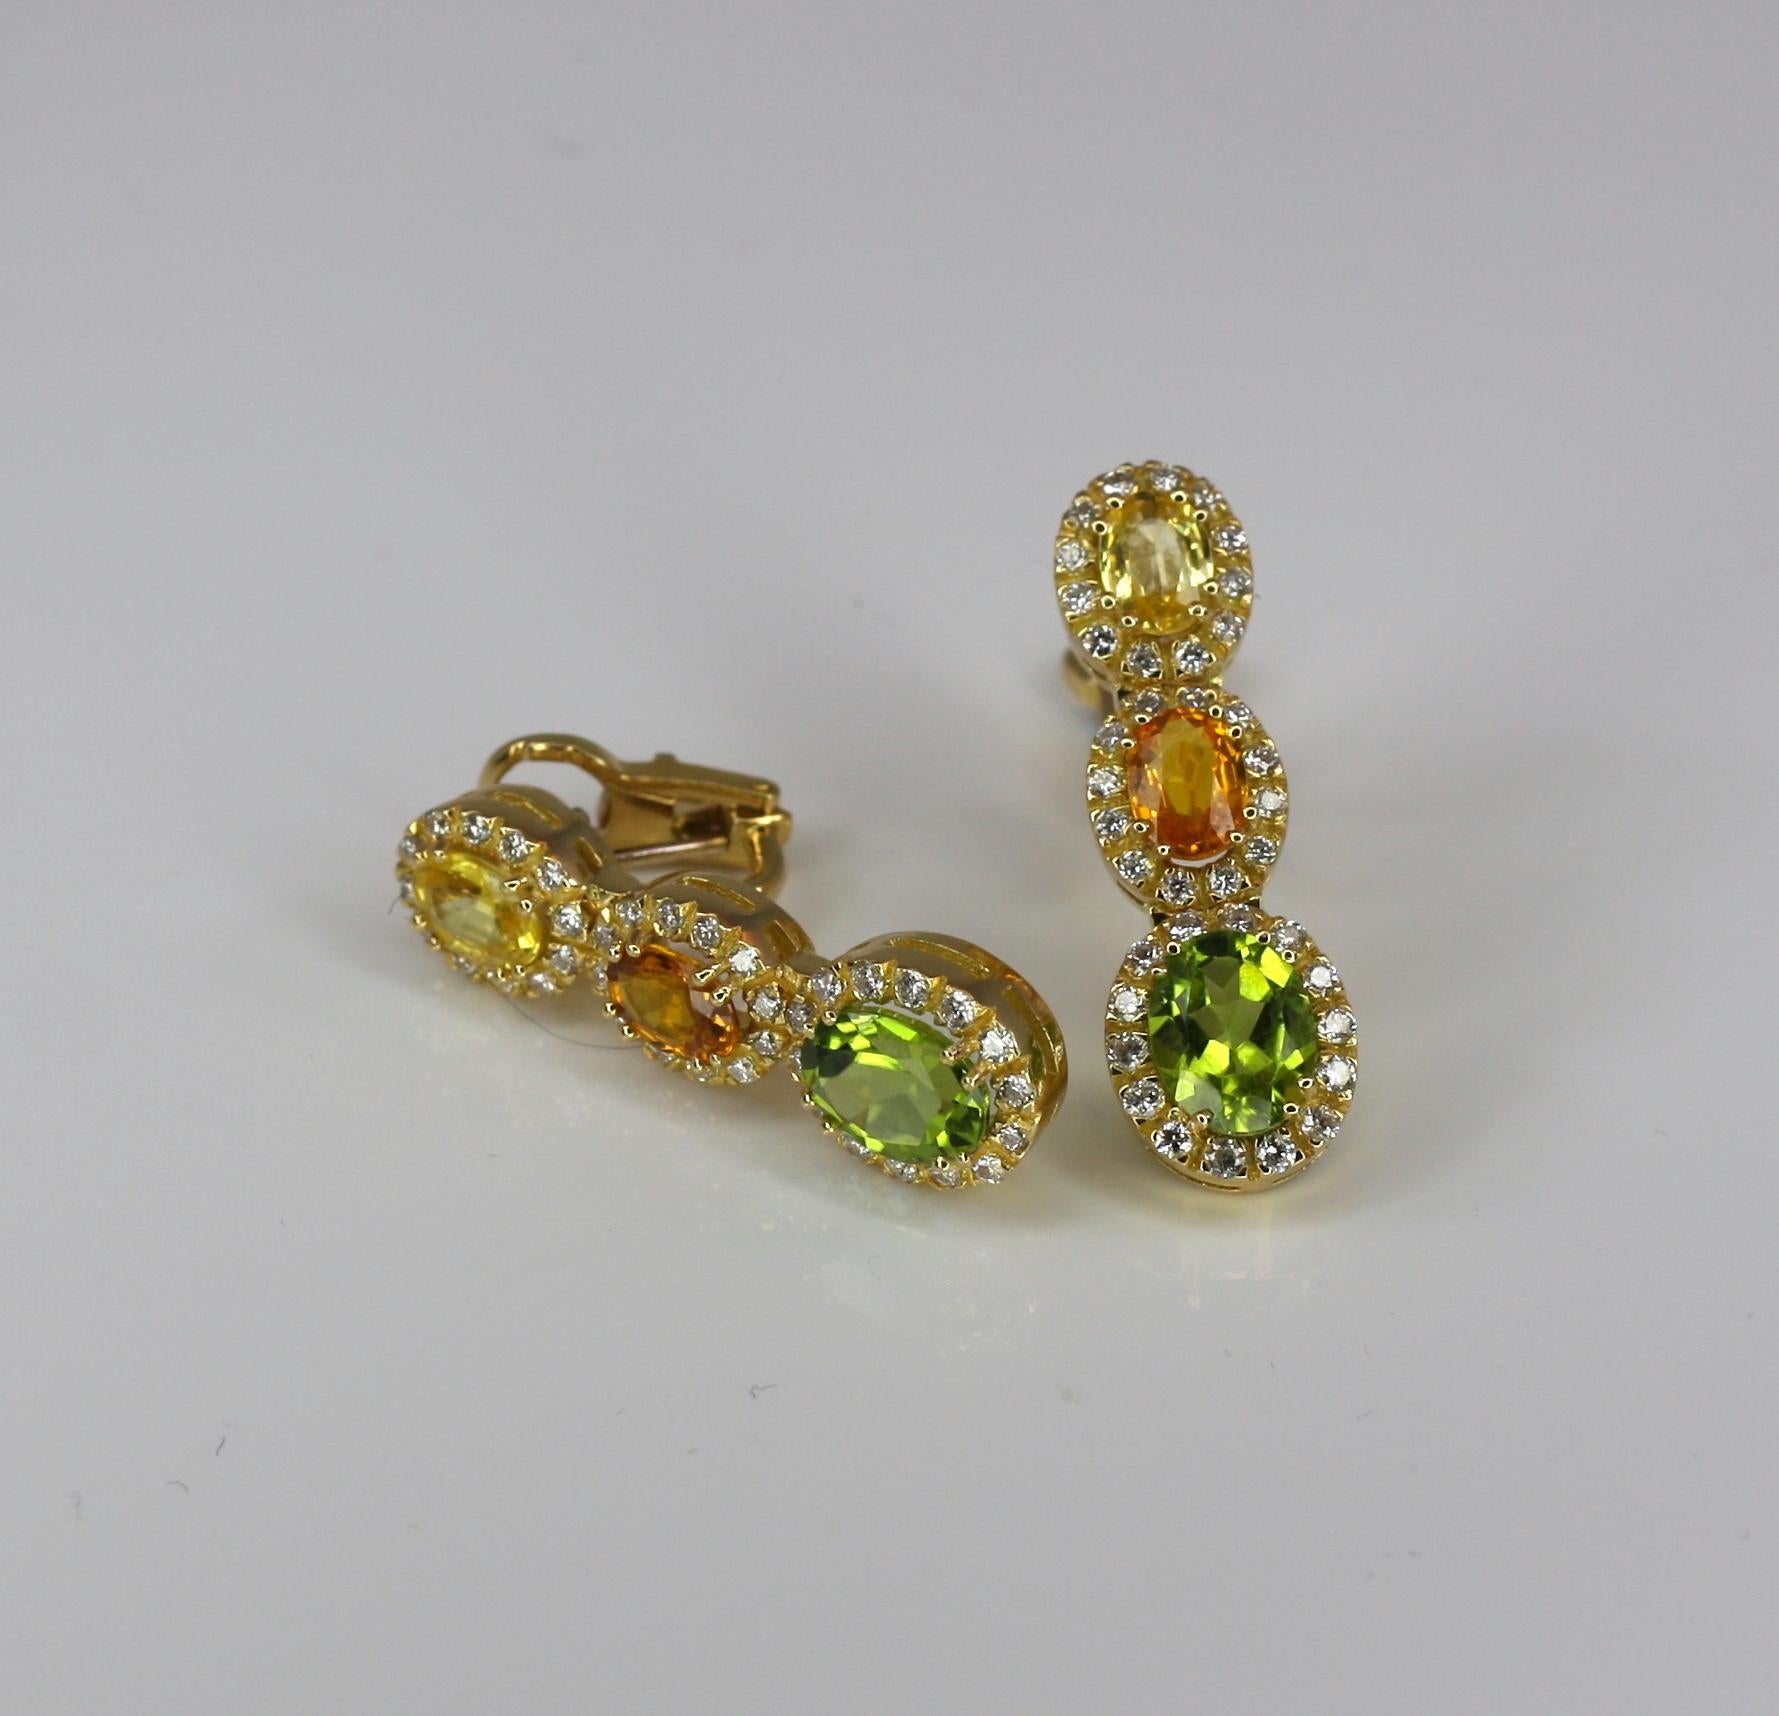 These dangle S.Georgios Earrings are 18 Karat yellow gold and all handmade. The earrings feature Yellow and Orange oval cut Sapphires, the total weight of 3.80 Carats and 4.40 Carat oval cut Peridots with Brilliant cut Diamonds, the total weight of